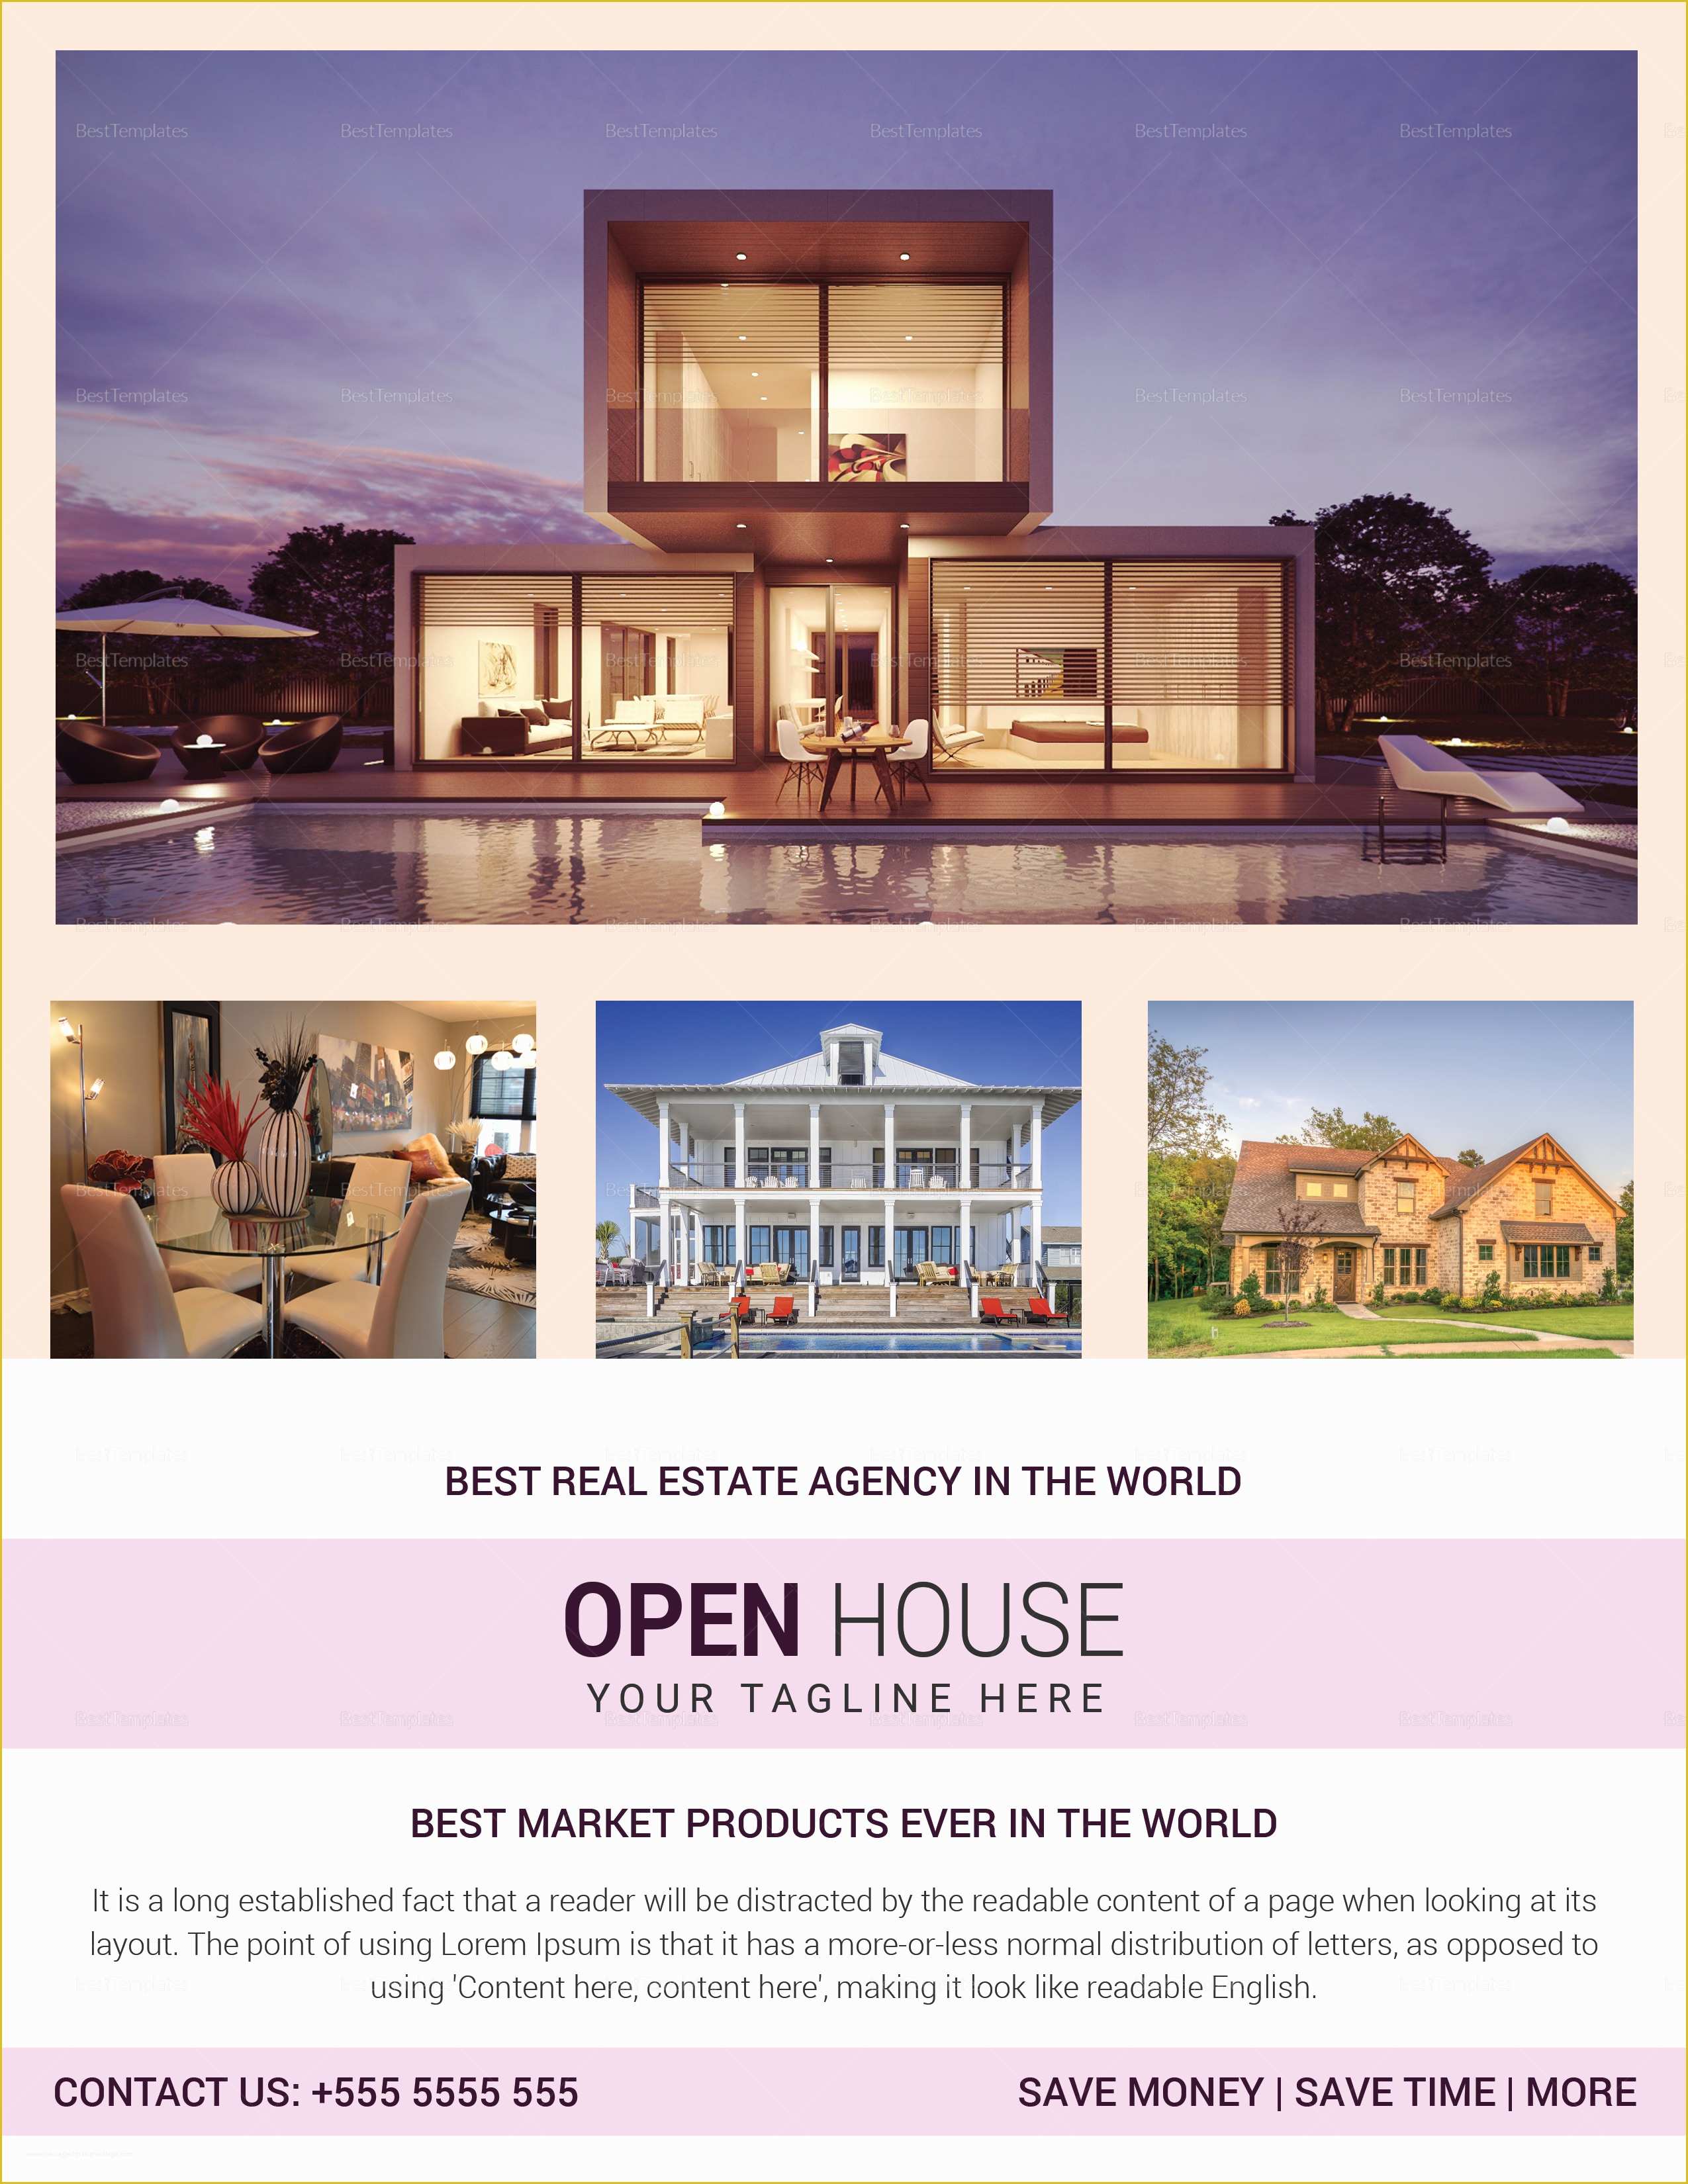 Open House Flyer Template Free Publisher Of Real Estate Agency Open House Flyer Design Template In